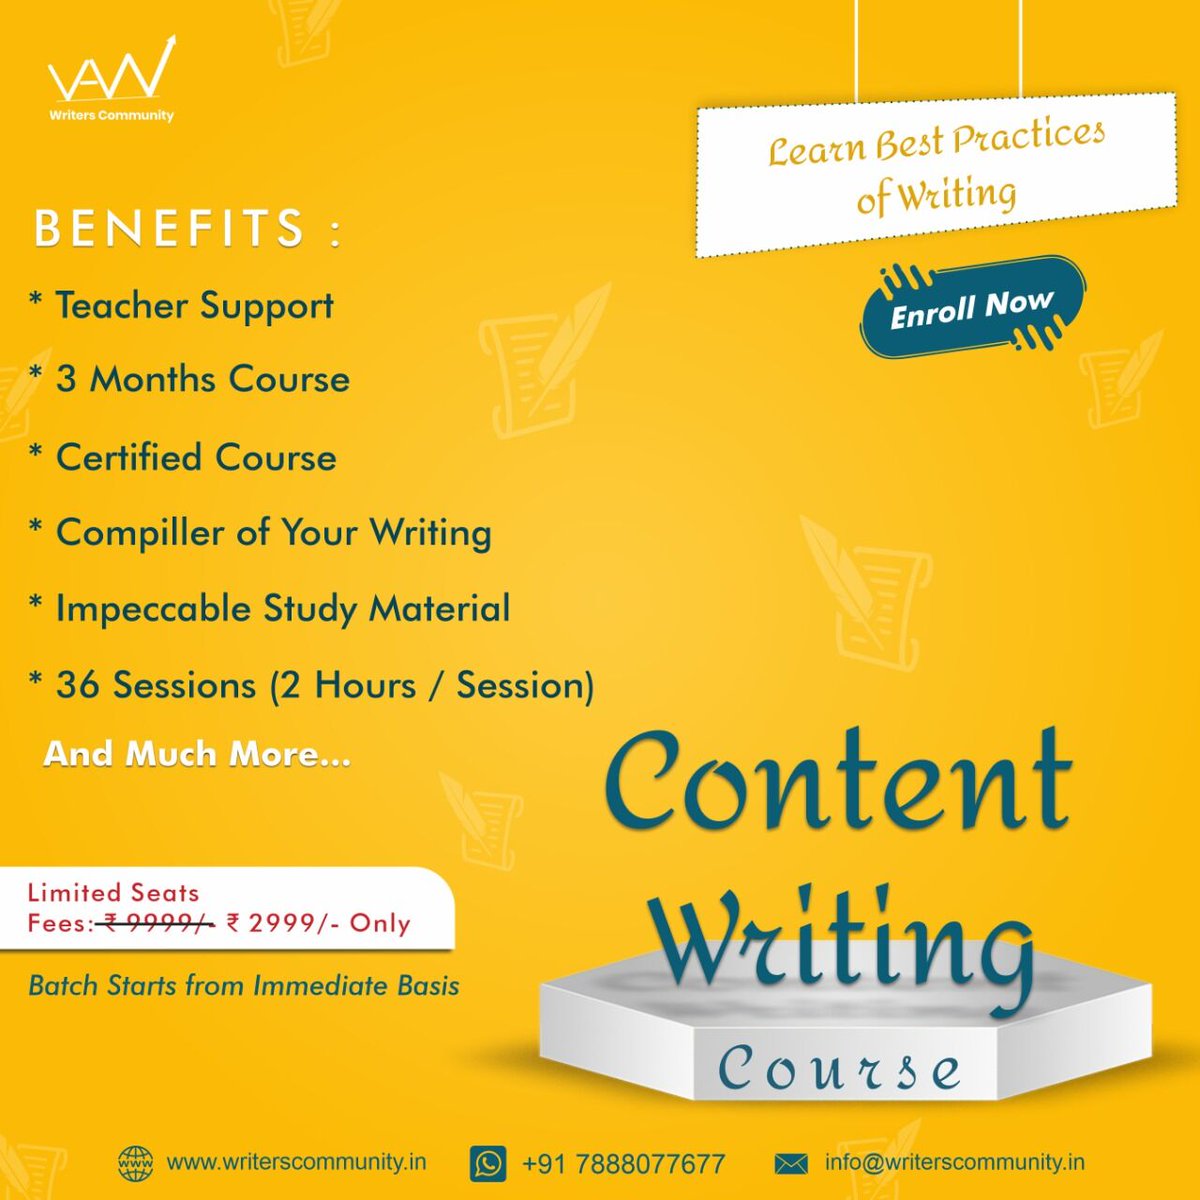 Discover the best ways of writing from experts. We introduce a Content Writing Courses with innumerable benefits. DM us to Know More ⠀ #OnlineClasses #Courses #LearningCourses